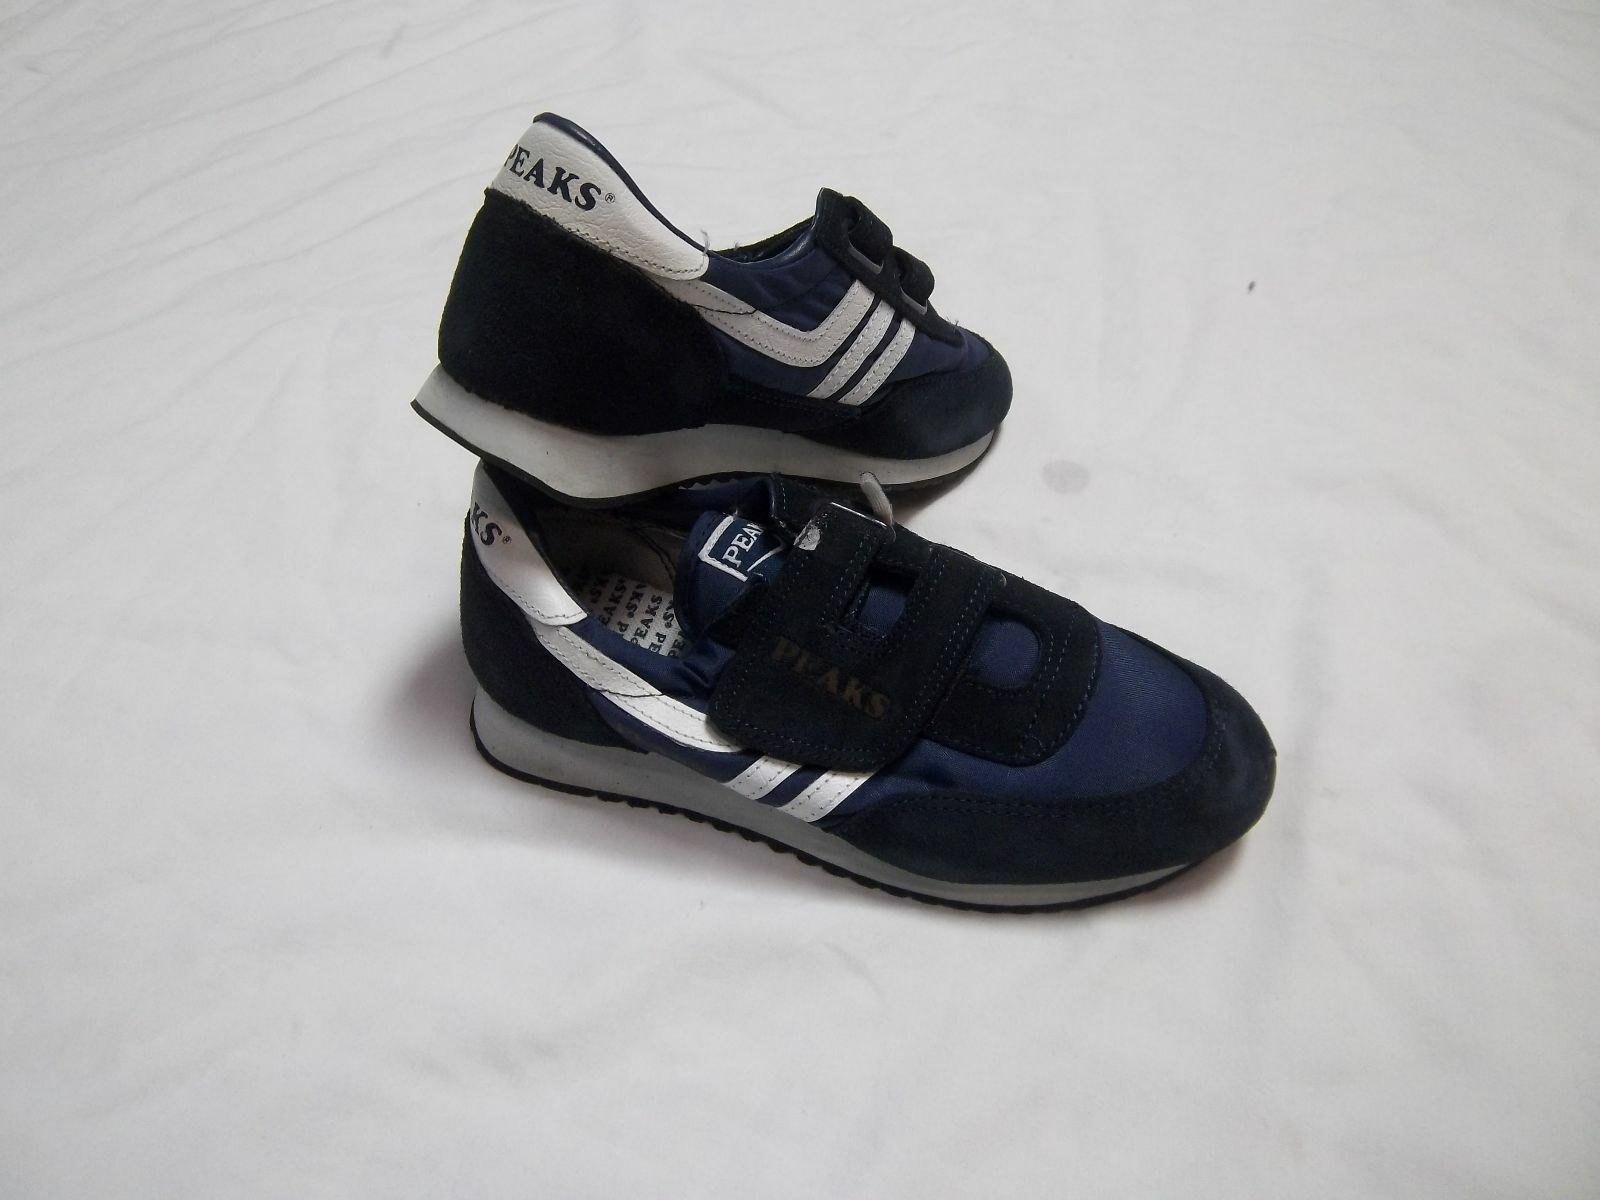 PEAKS 790 VINTAGE YOUTH  TENNIS SHOE(VARIOUS SIZES) NAVY/WHITE COLOR